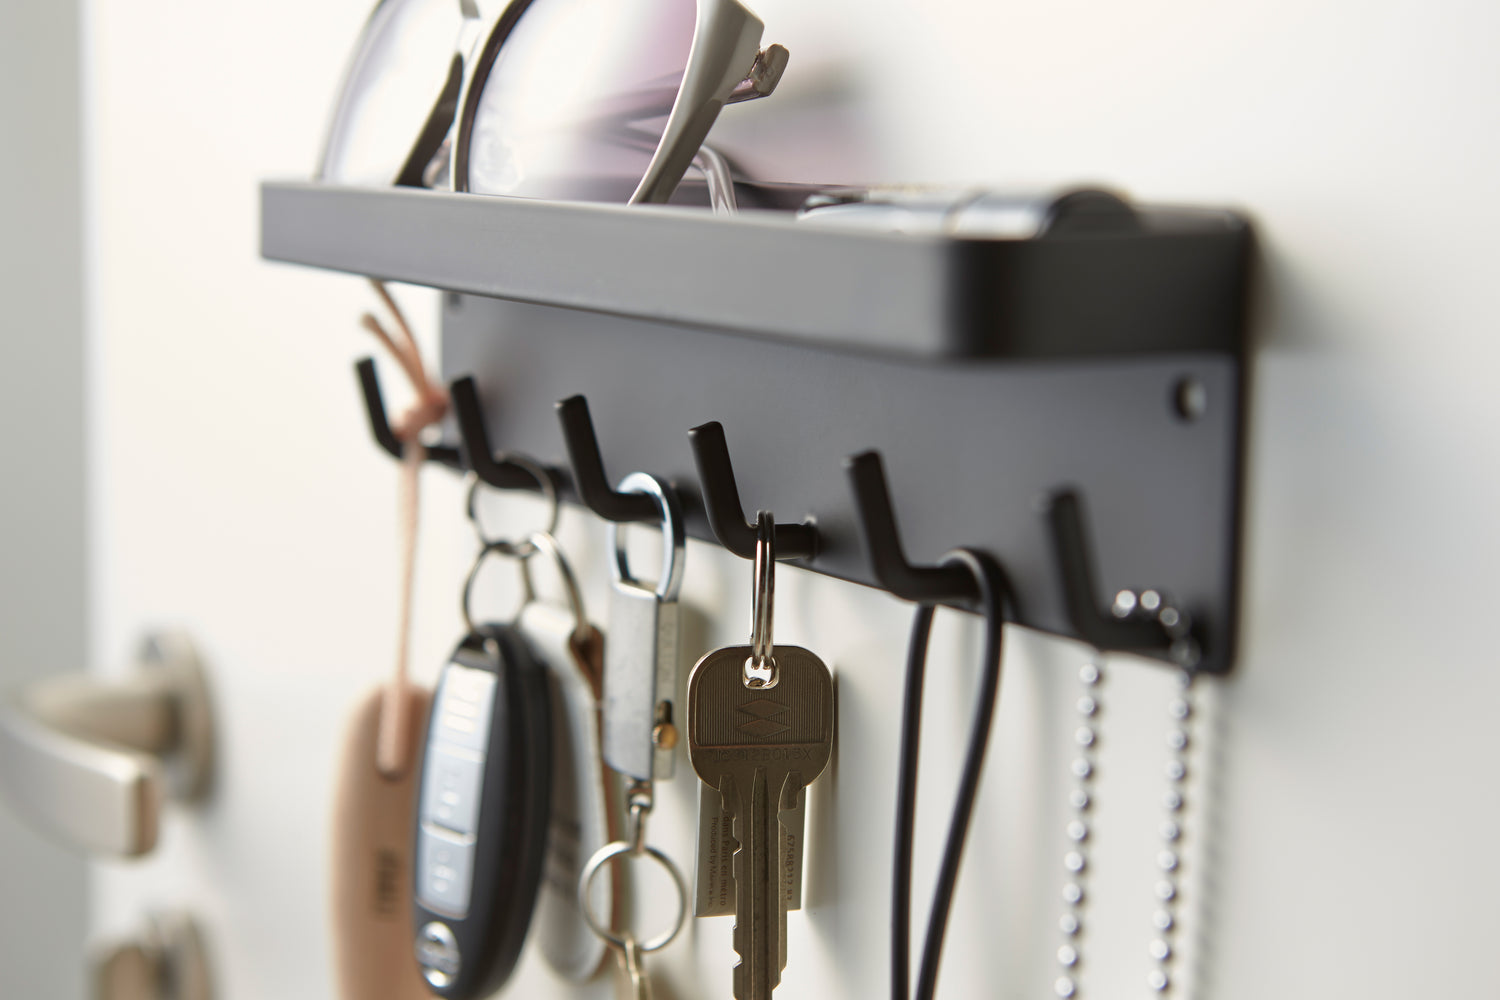 View 12 - Black Magnetic Key Rack with Tray holding sunglasses and keys by Yamazaki Home.